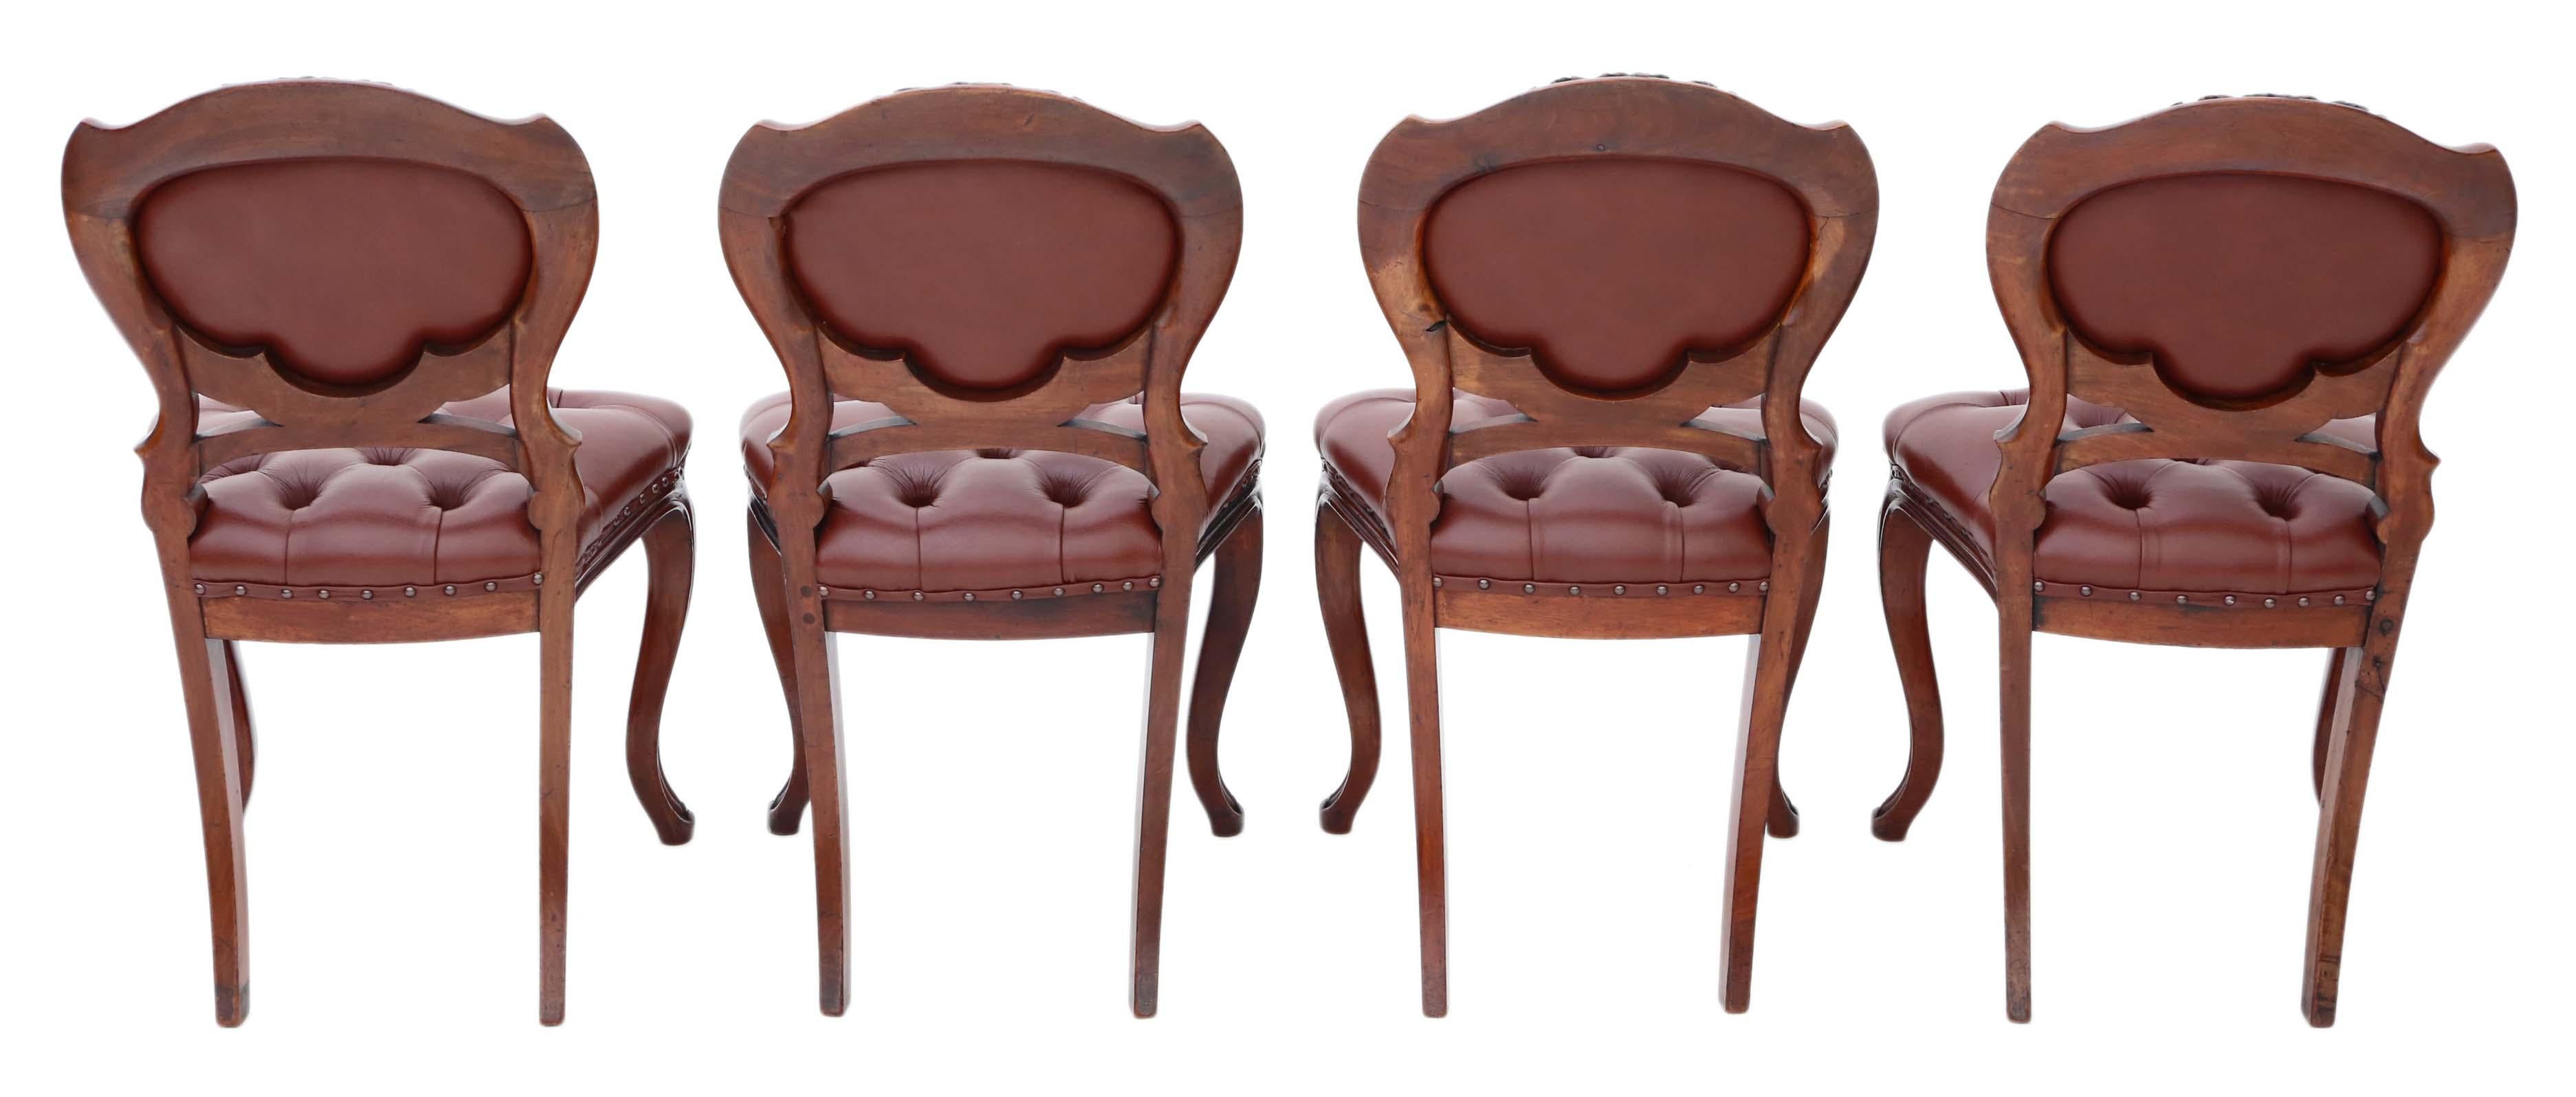 Antique set of 4 Victorian circa 1870 mahogany dining chairs.
Recently restored, solid and strong, with no loose joints and replacement deep button leather upholstery. Very decorative.
Would look great in the right location!
Overall maximum